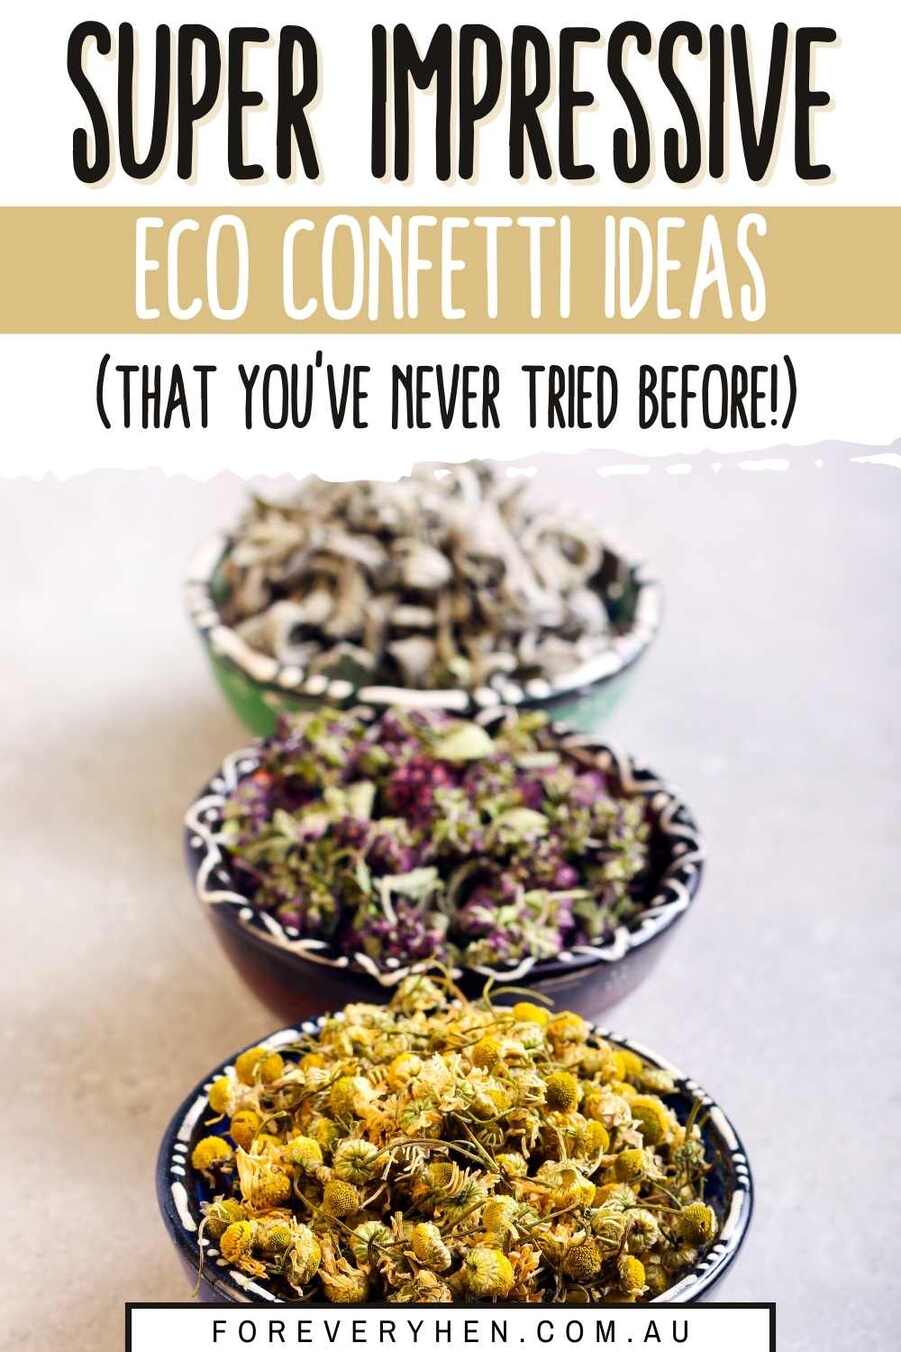 3 bowls of natural confetti. Text overlay: Super impressive eco confetti ideas (that you've never tried before!)